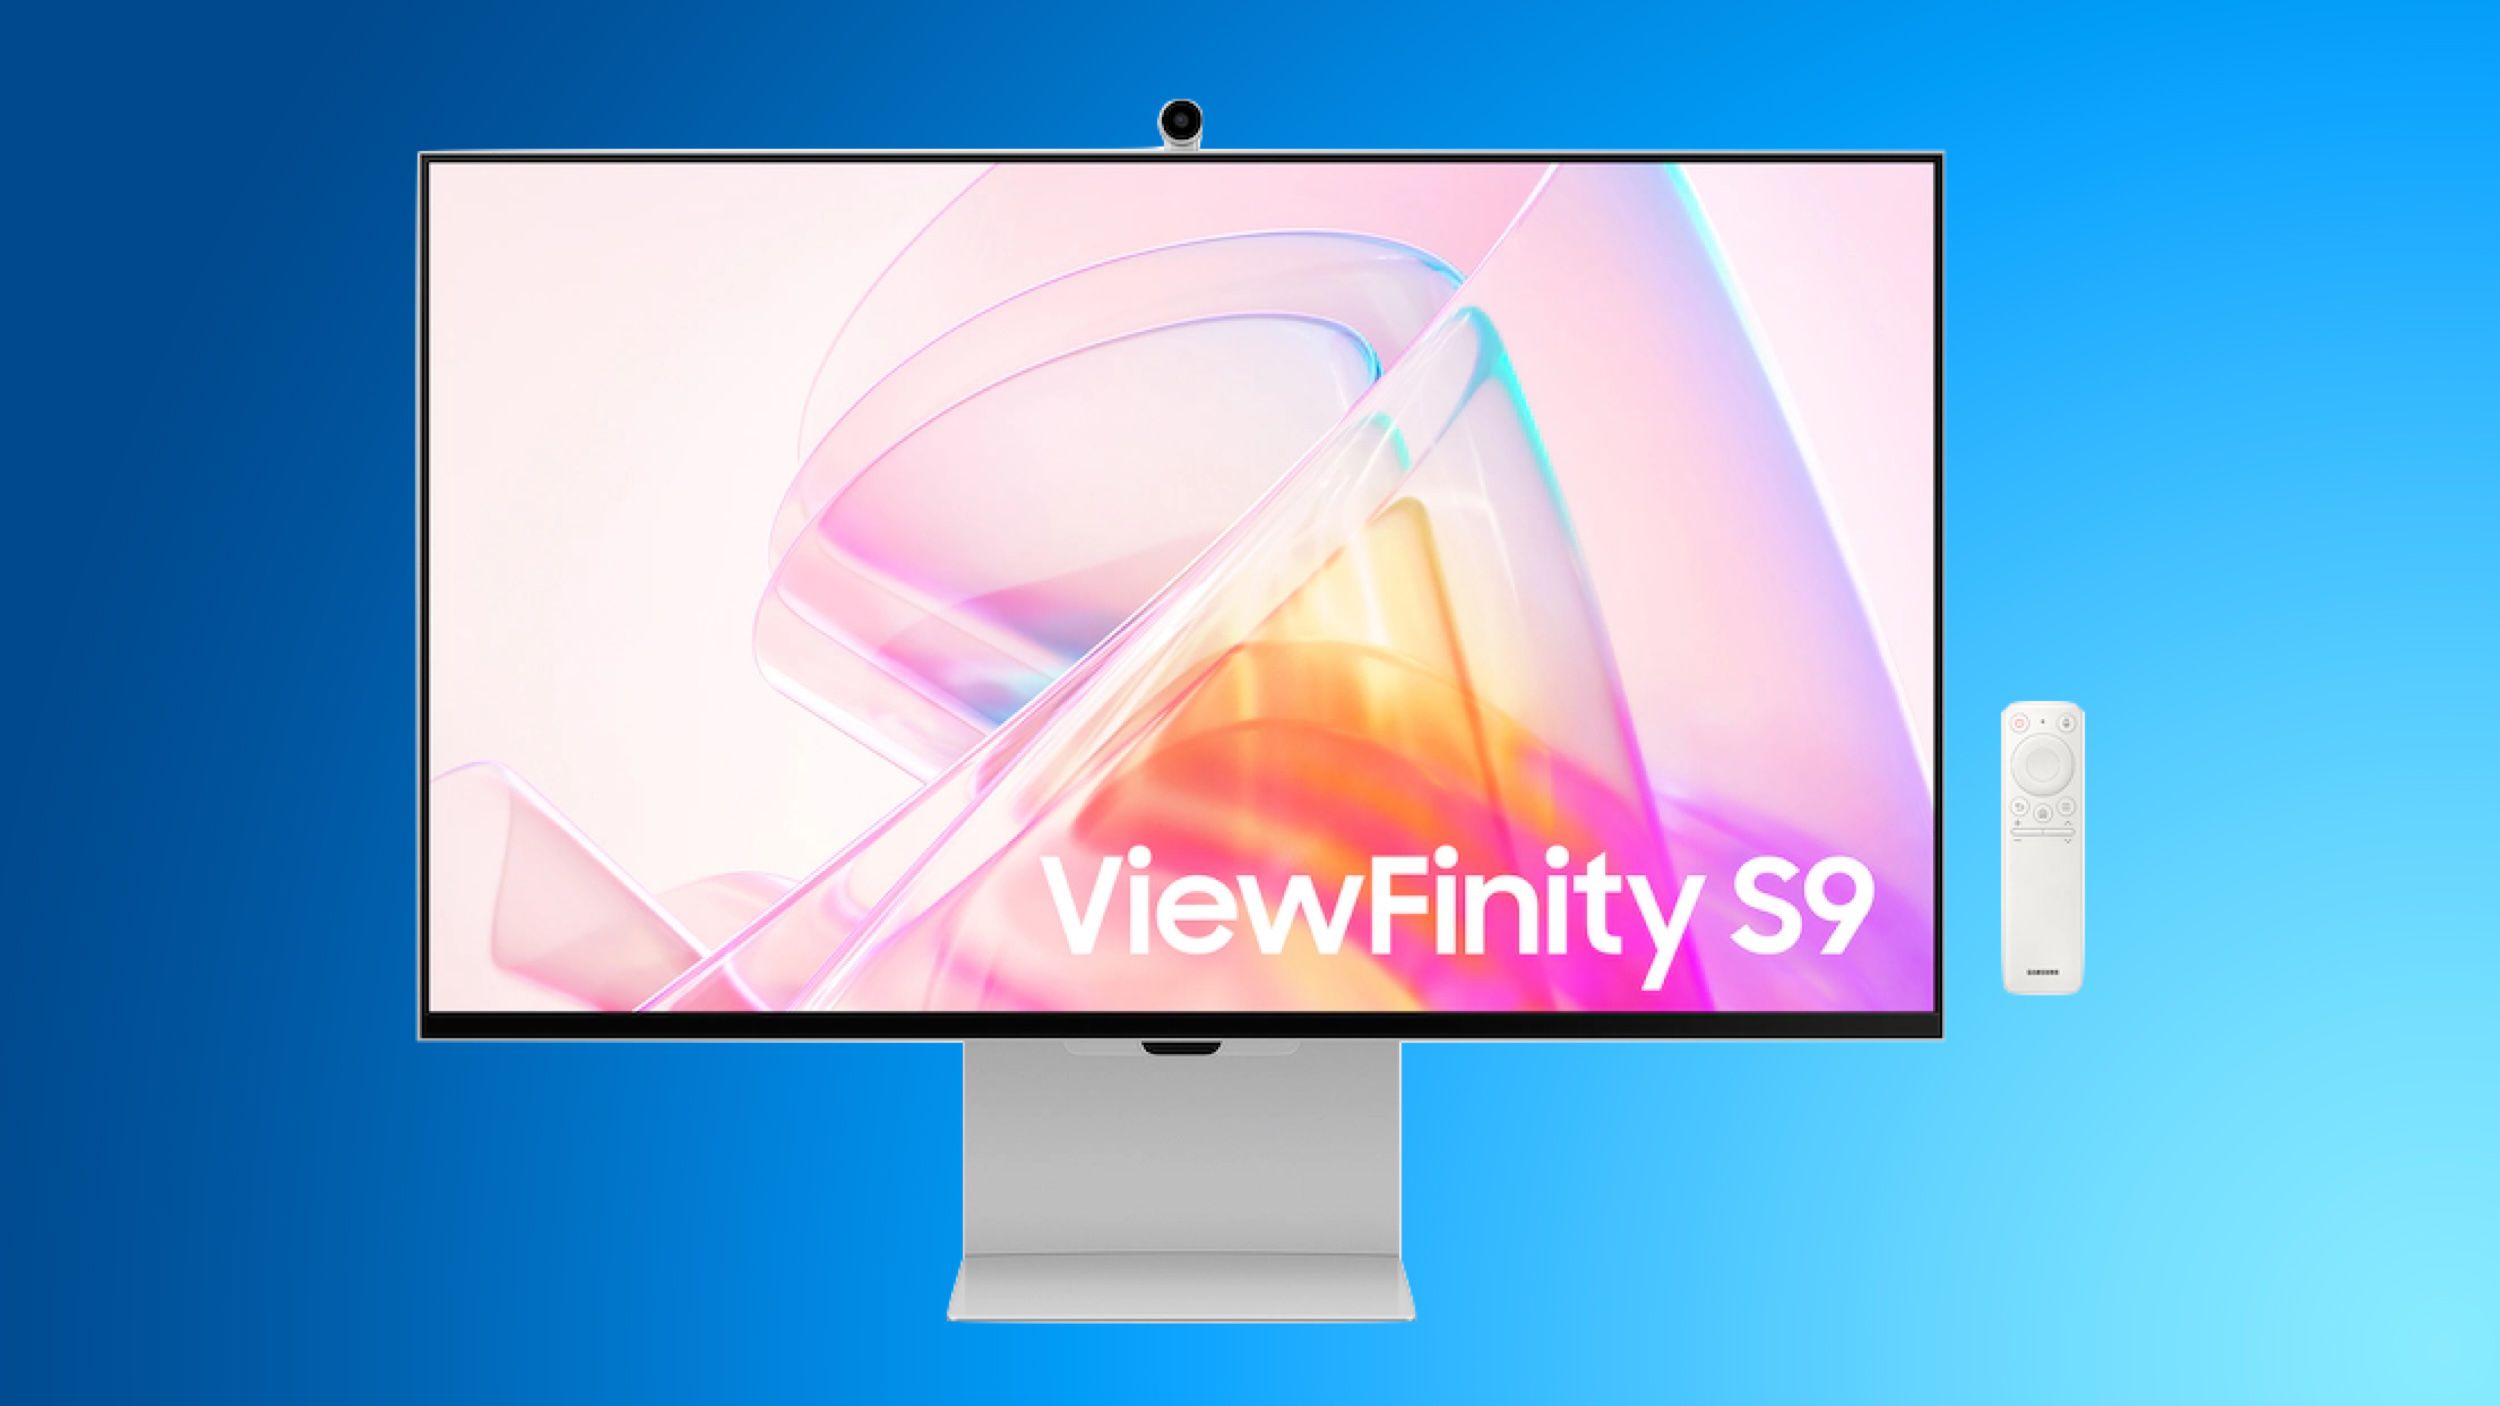 Hurry and Save 0 on Samsung’s ViewFinity S9 5K Smart Monitor, Along with Other Great Display Deals